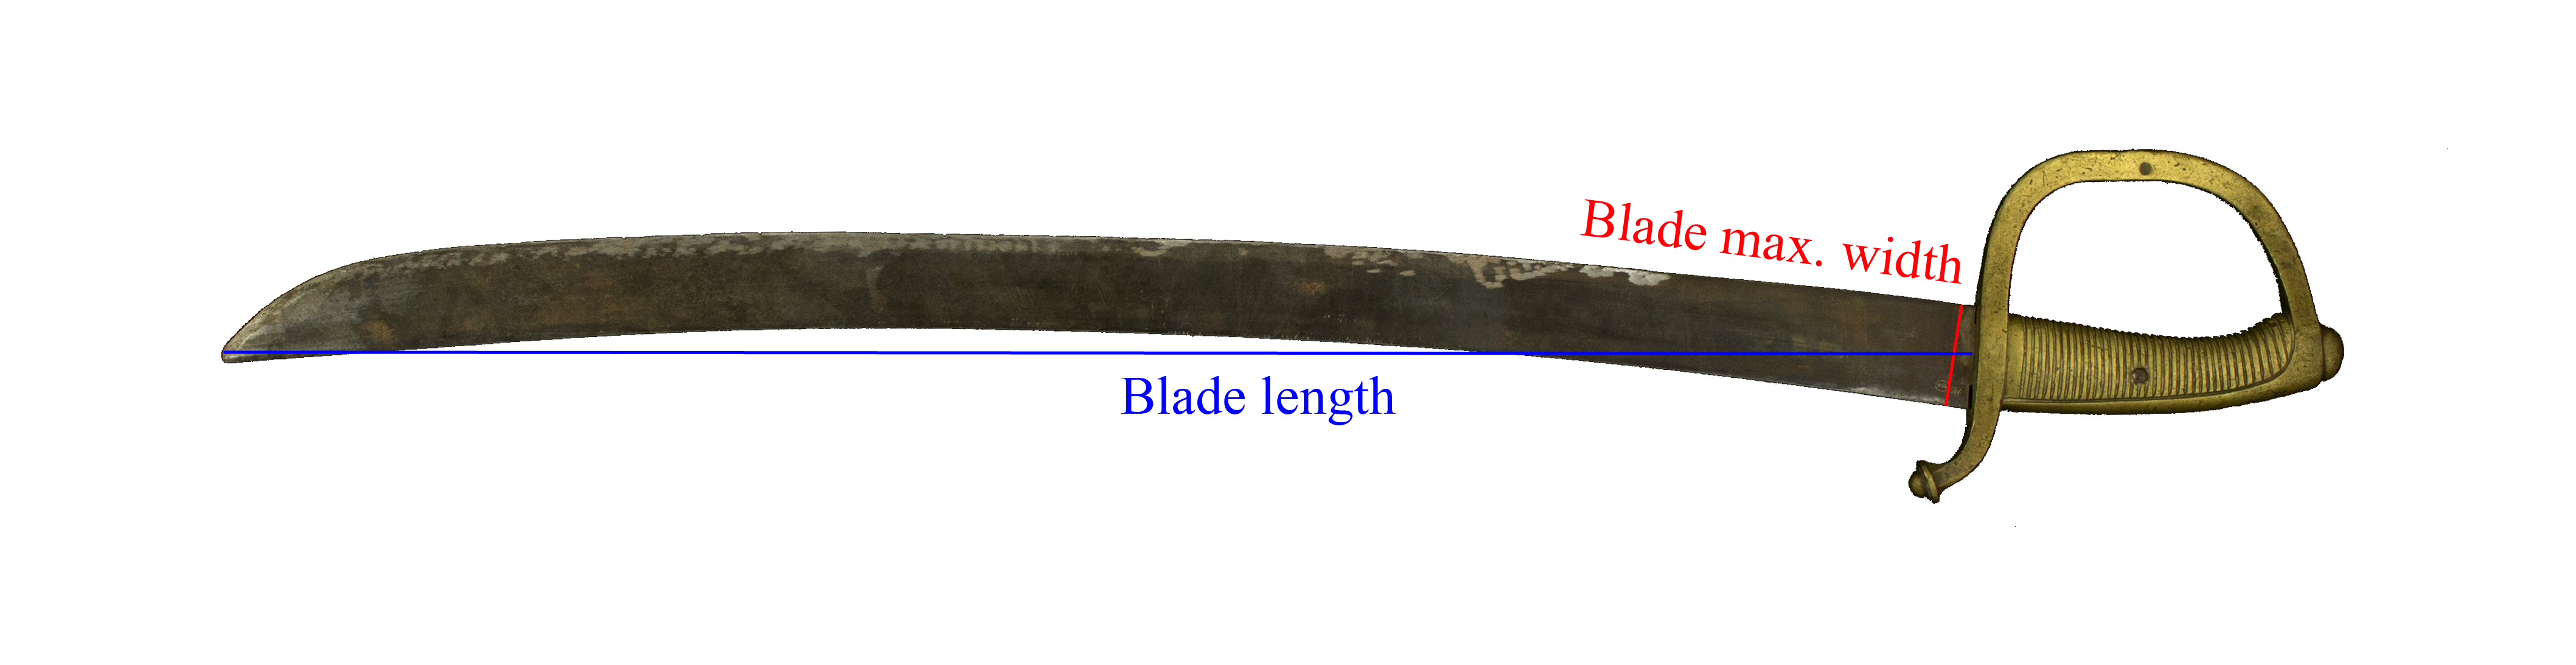 Curved blade width